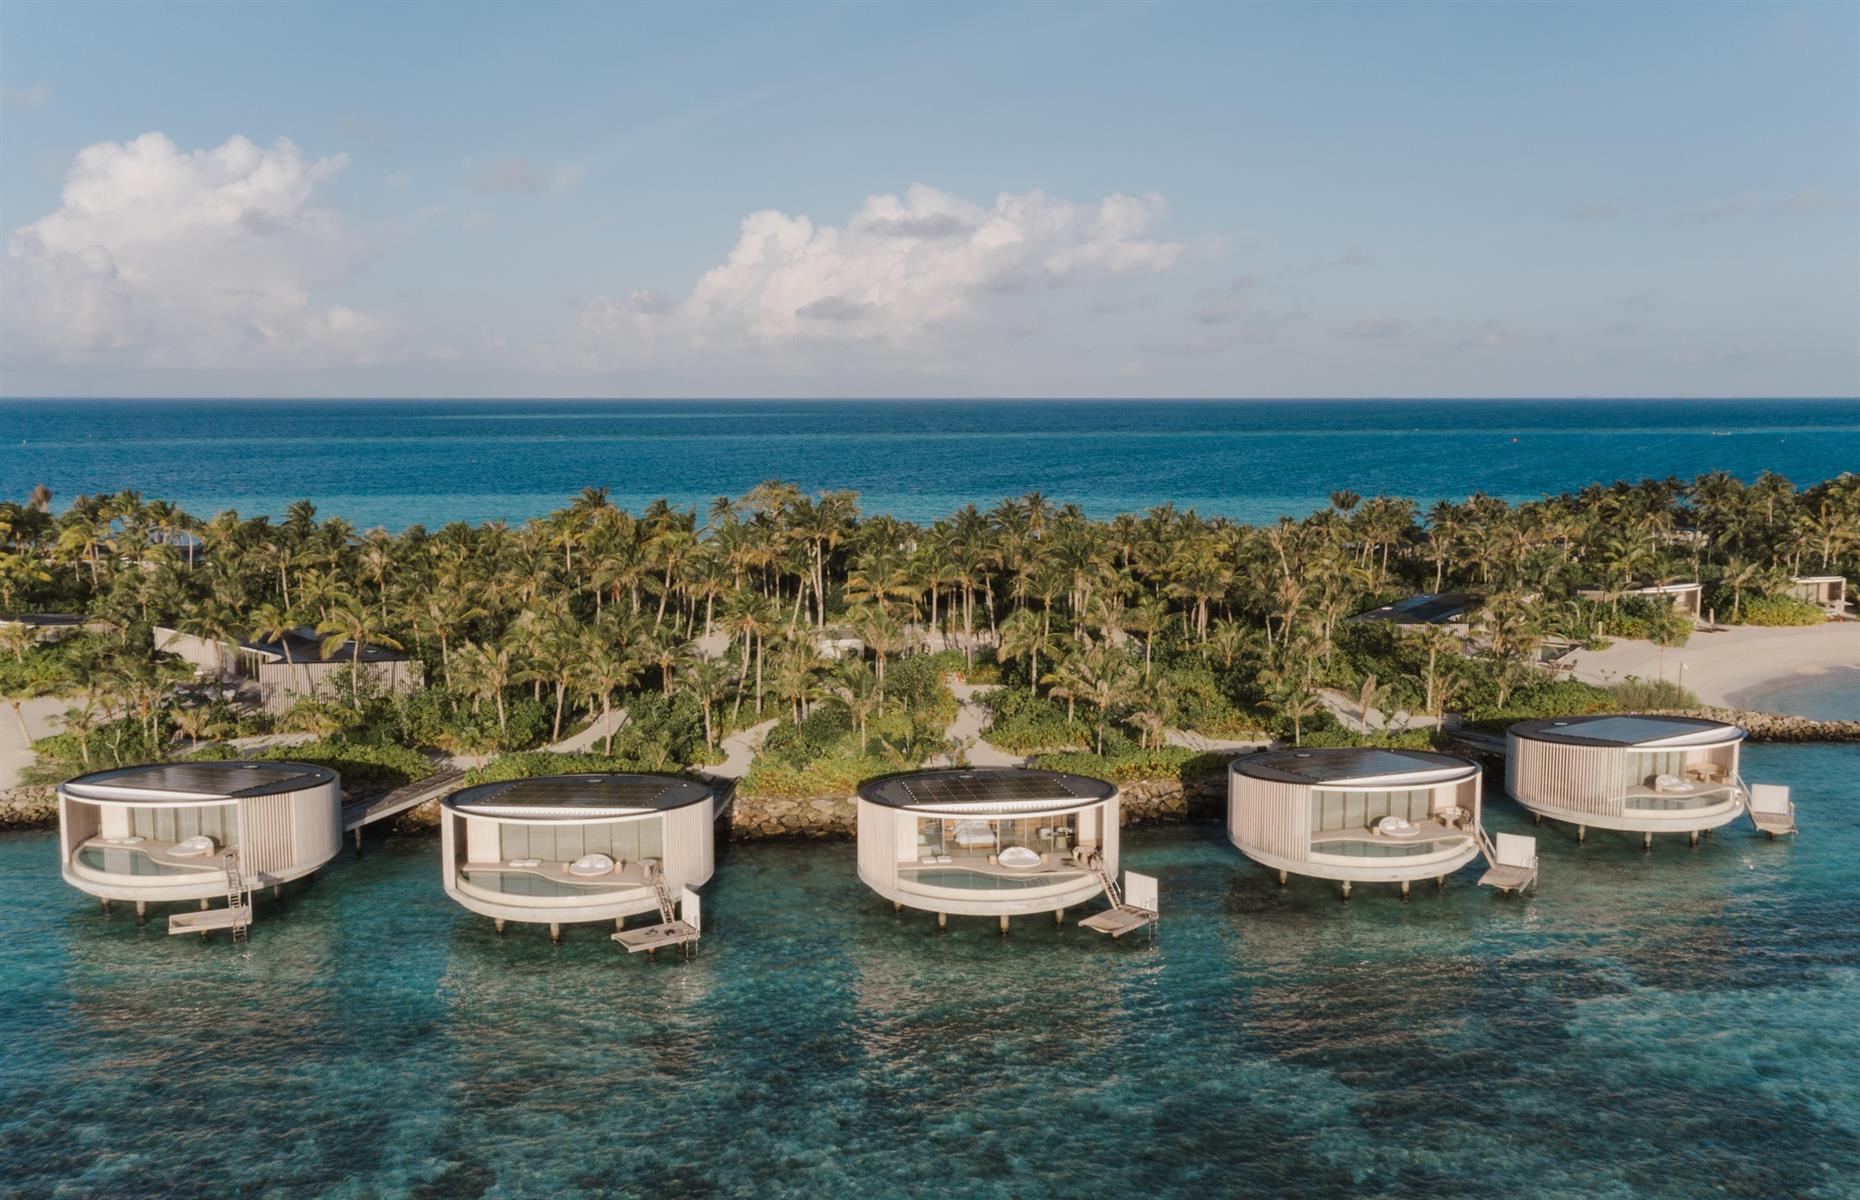 <p>The circular spa is set over the ocean too – here you can indulge in ultra-luxe treatments, from bamboo massages to natural body wraps using Maldivian herbs. There are also seven restaurants and bars, including a fine-dining Japanese option and a more laid-back beach shack with DJ sets. </p>